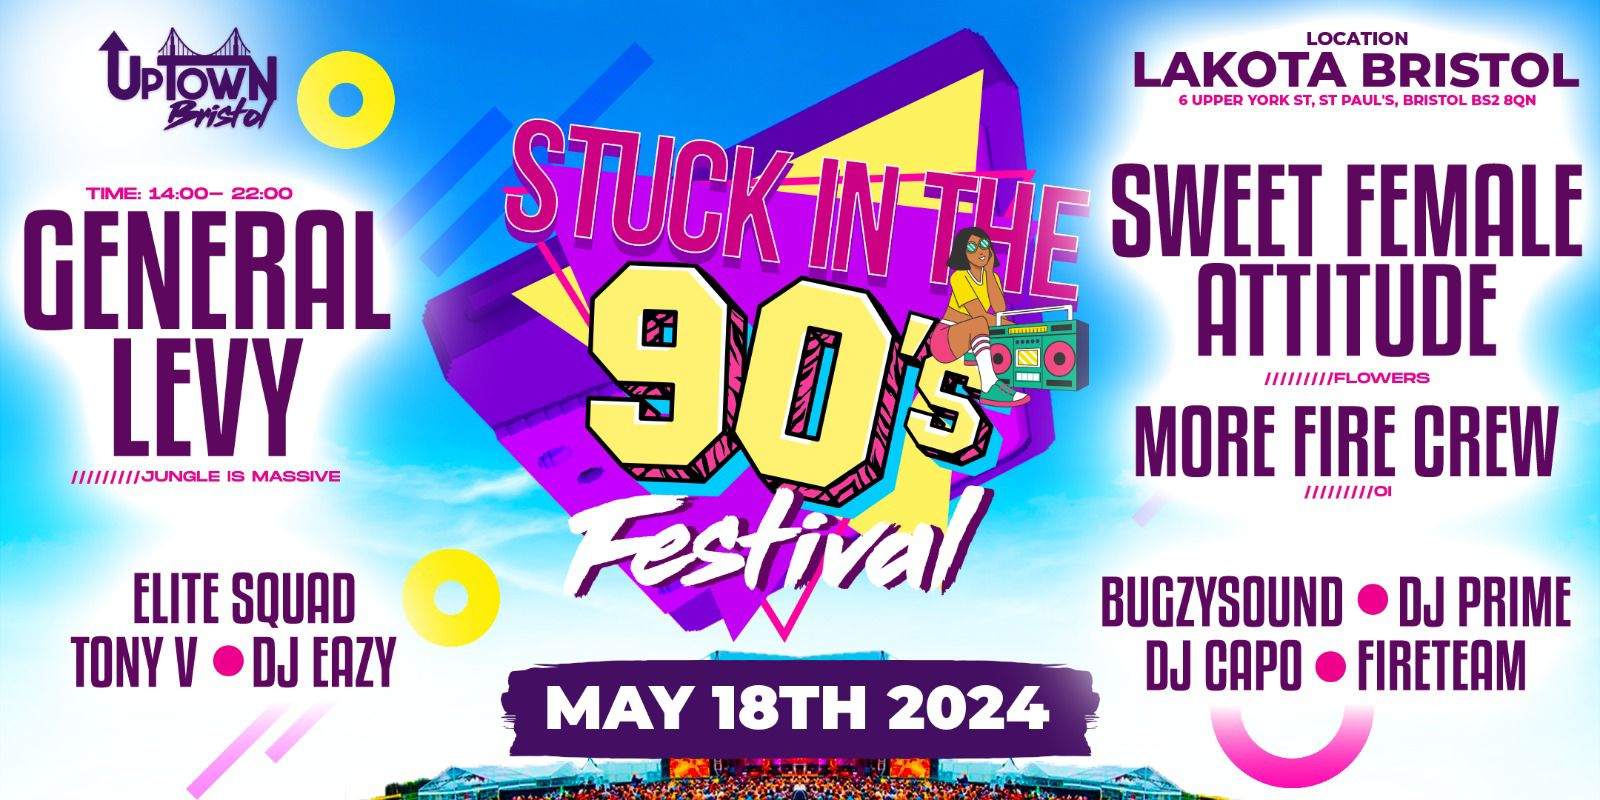 Stuck In The 90s - フライヤー表